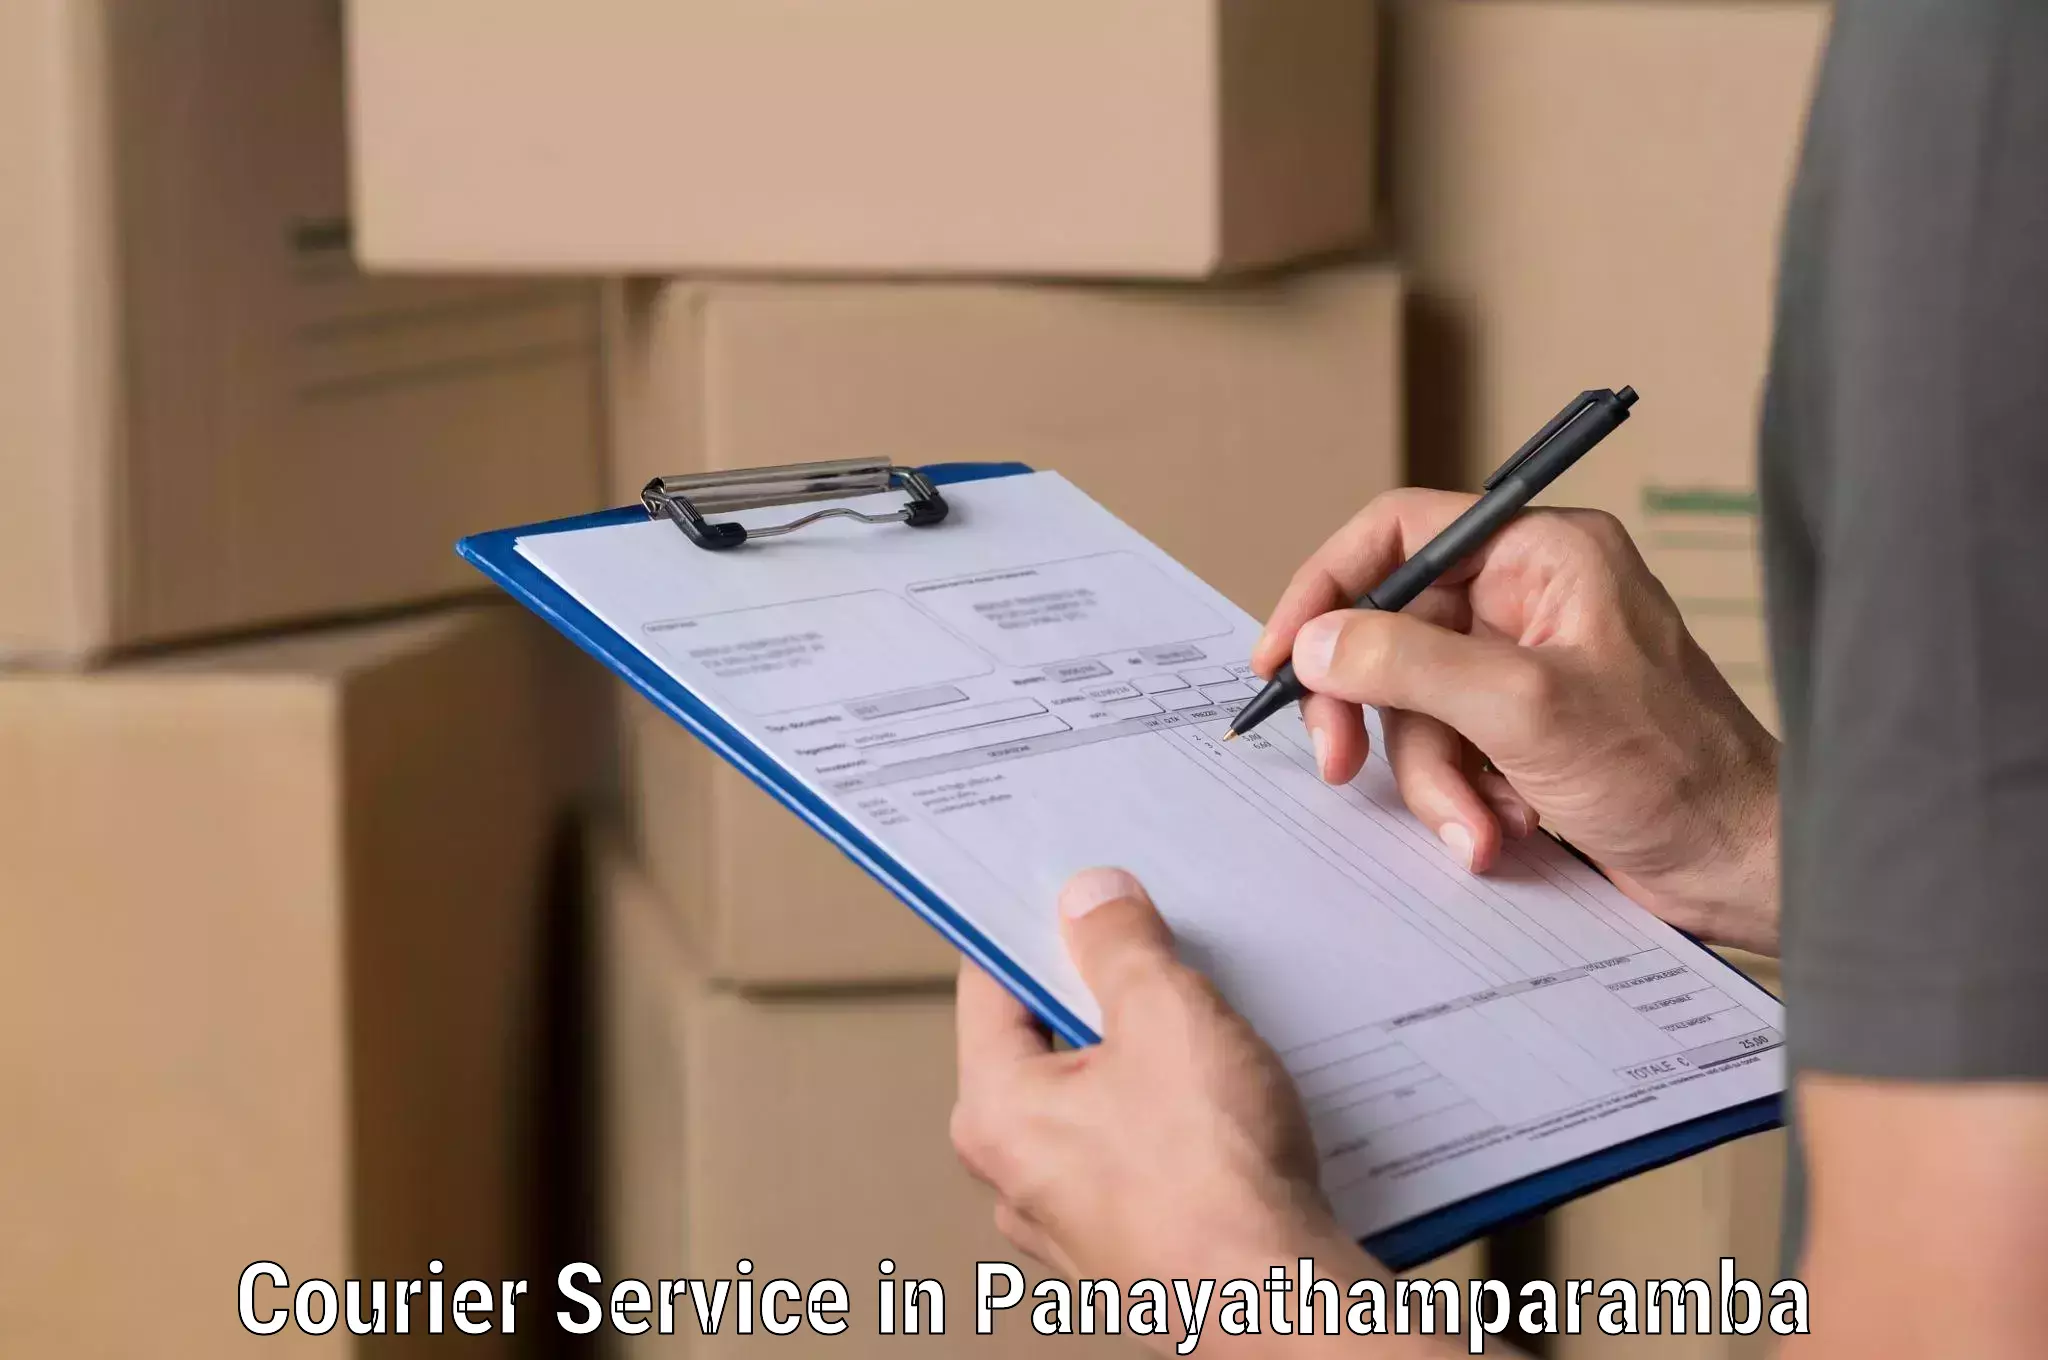 Streamlined delivery processes in Panayathamparamba